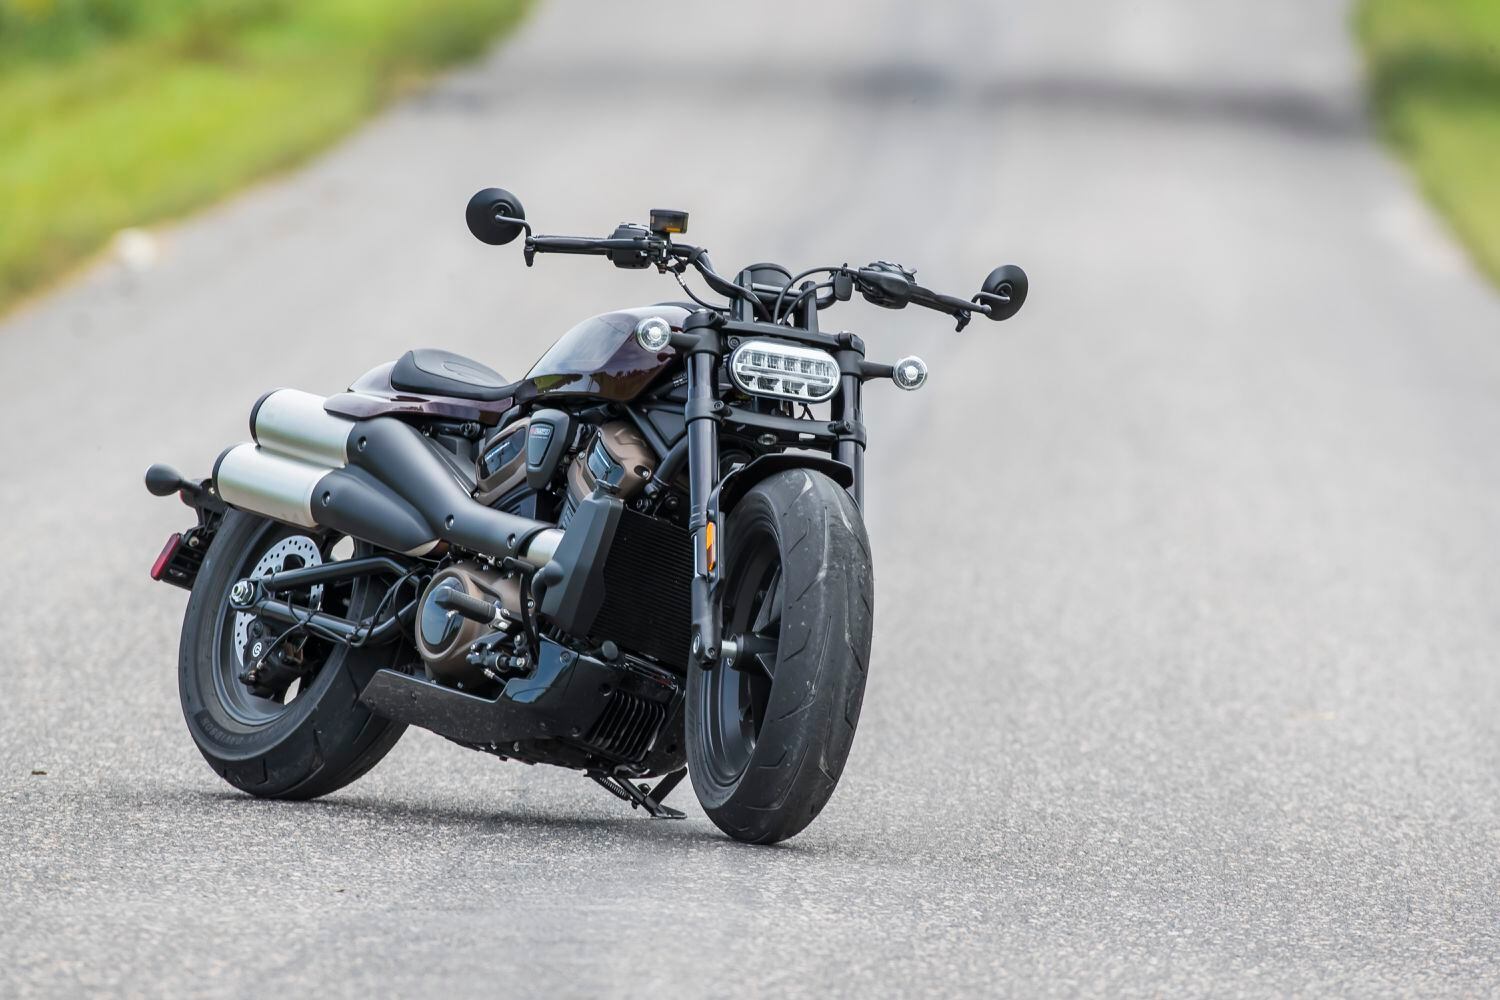 cache Meter Farewell Review: The 2021 Harley-Davidson Sportster S is a peculiar bike, but it's  also entertaining and competitive - The Globe and Mail